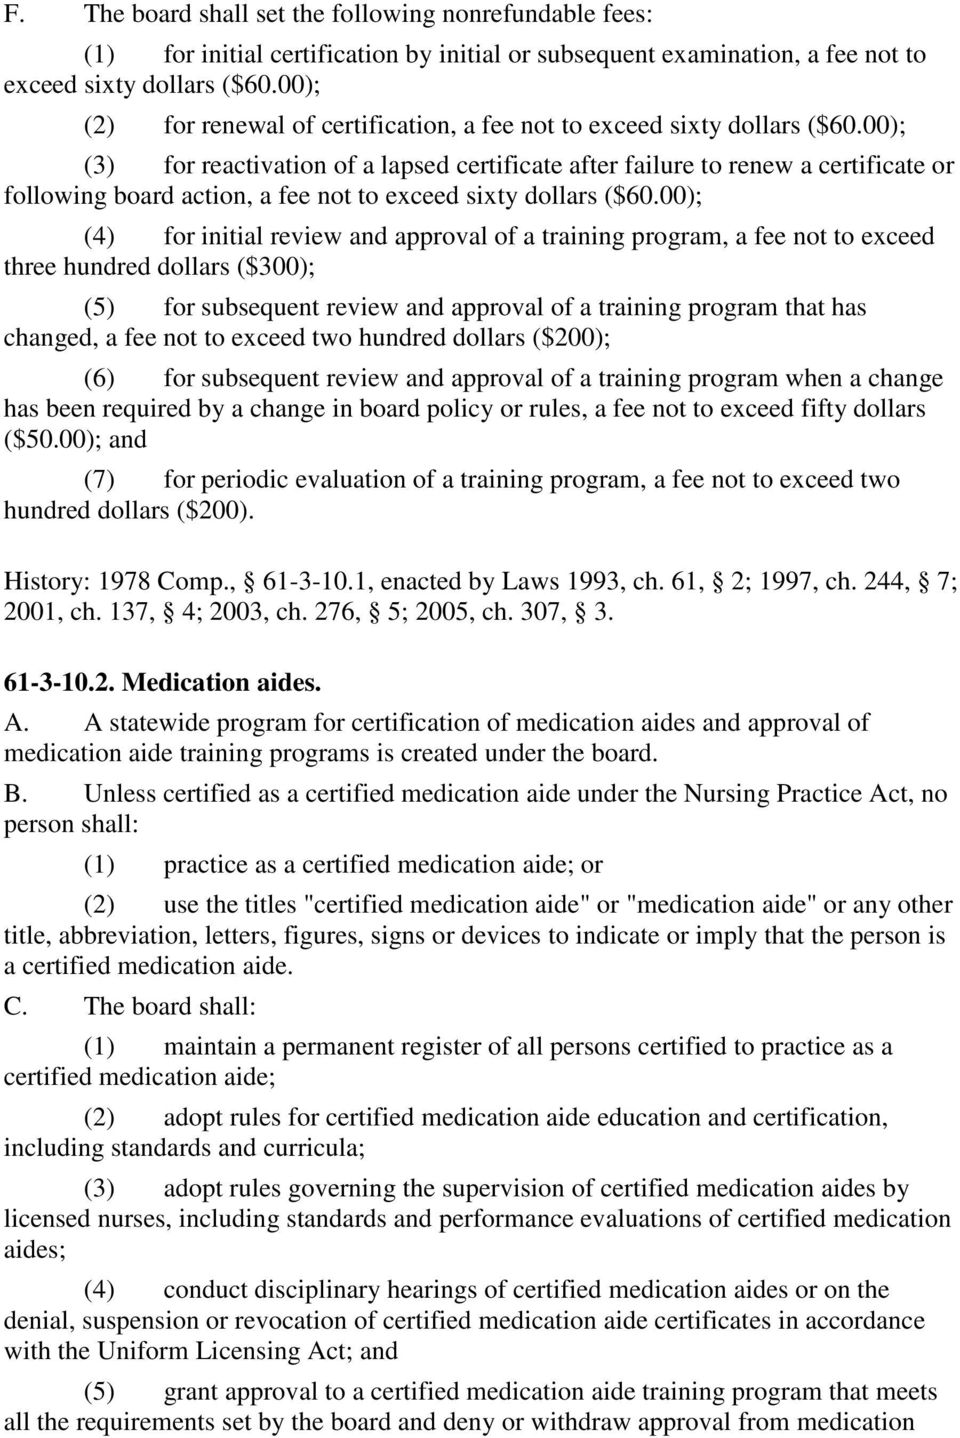 00); (3) for reactivation of a lapsed certificate after failure to renew a certificate or following board action, a fee not to exceed sixty dollars ($60.